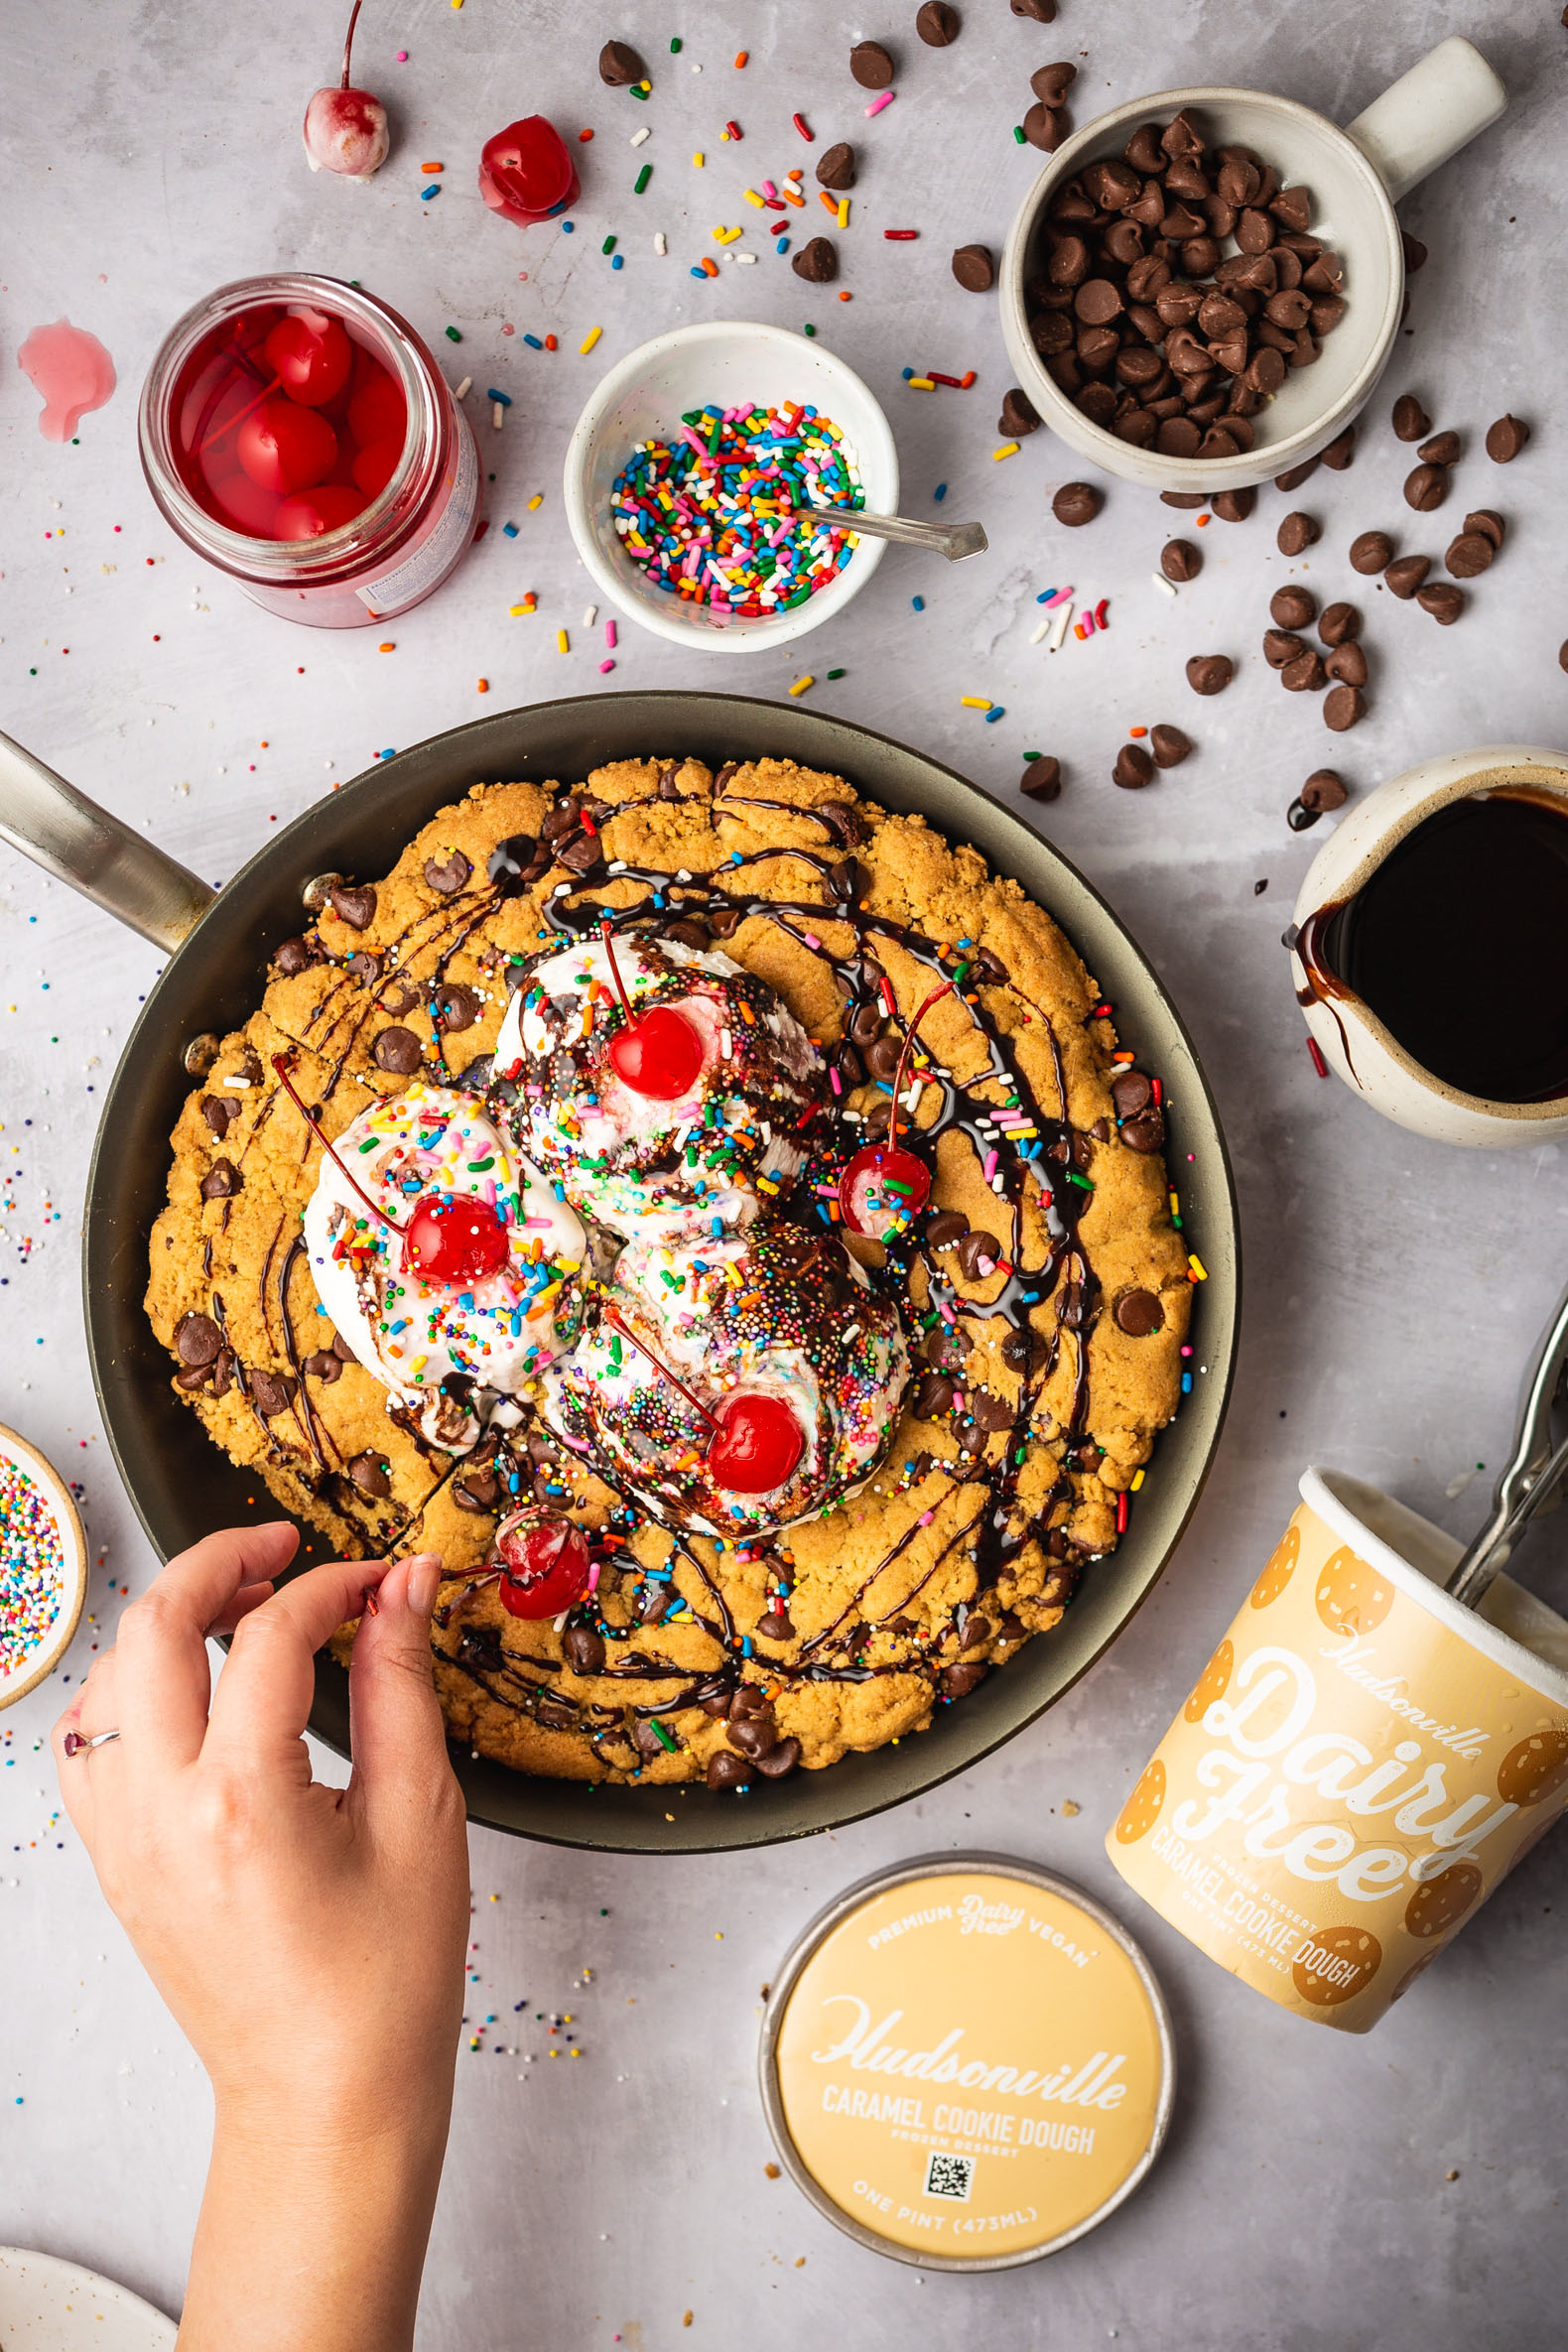 How To Make a Brown Butter Chocolate Chip Skillet Cookie - Chef Savvy